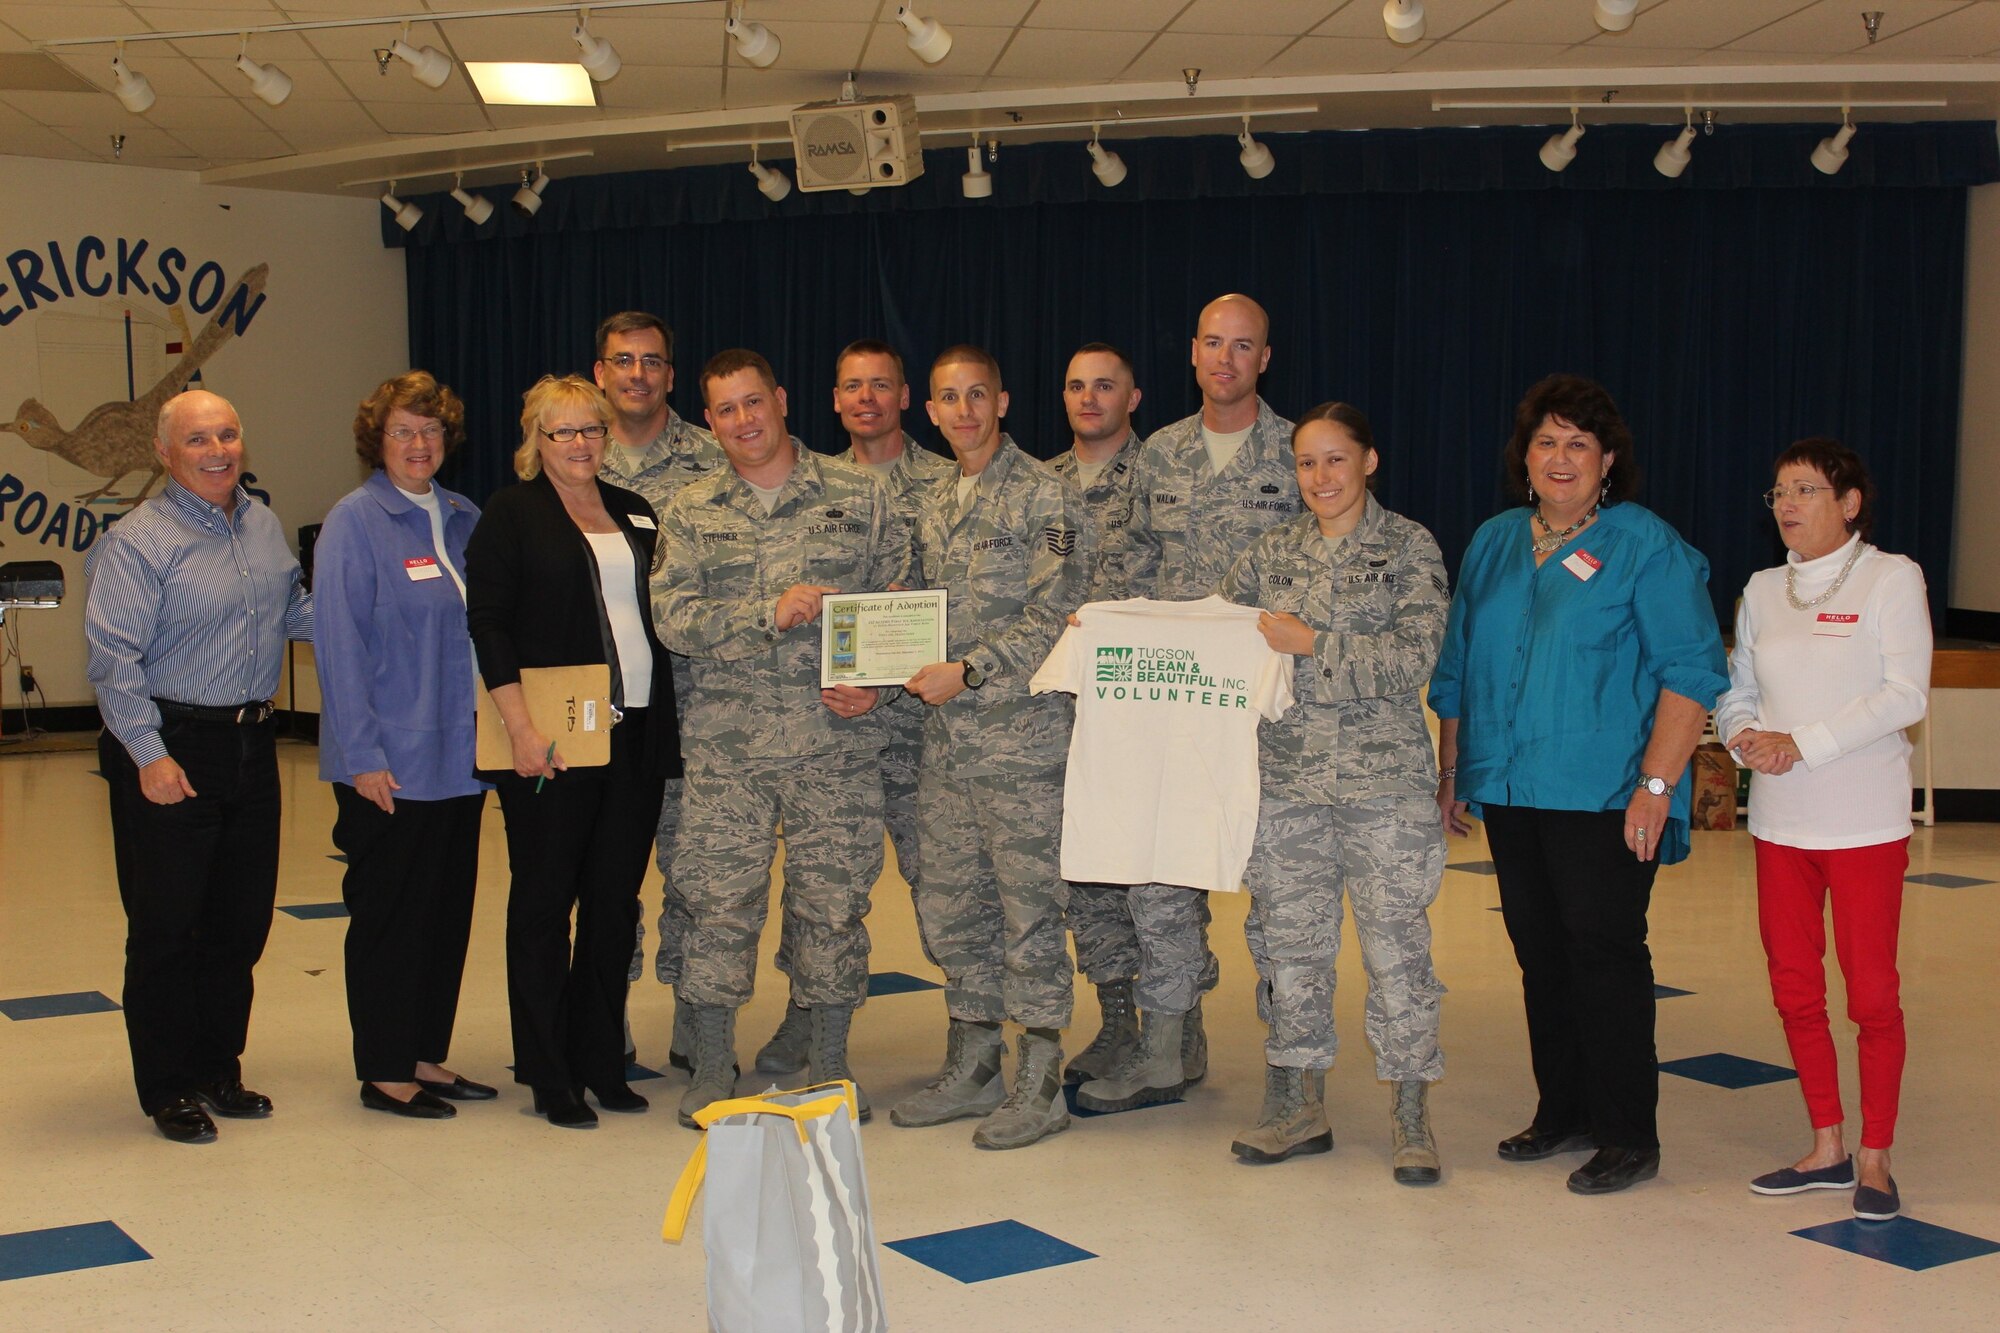 A ceremony honoring the 612th Air Communication Squadron’s First Six Association was held in the Tucson community, Nov. 7. The group was officially recognized by several community leaders at Erikson Elementary School for adopting one of Tucson’s local parks, Vista del Prado Park. (Courtesy photo)